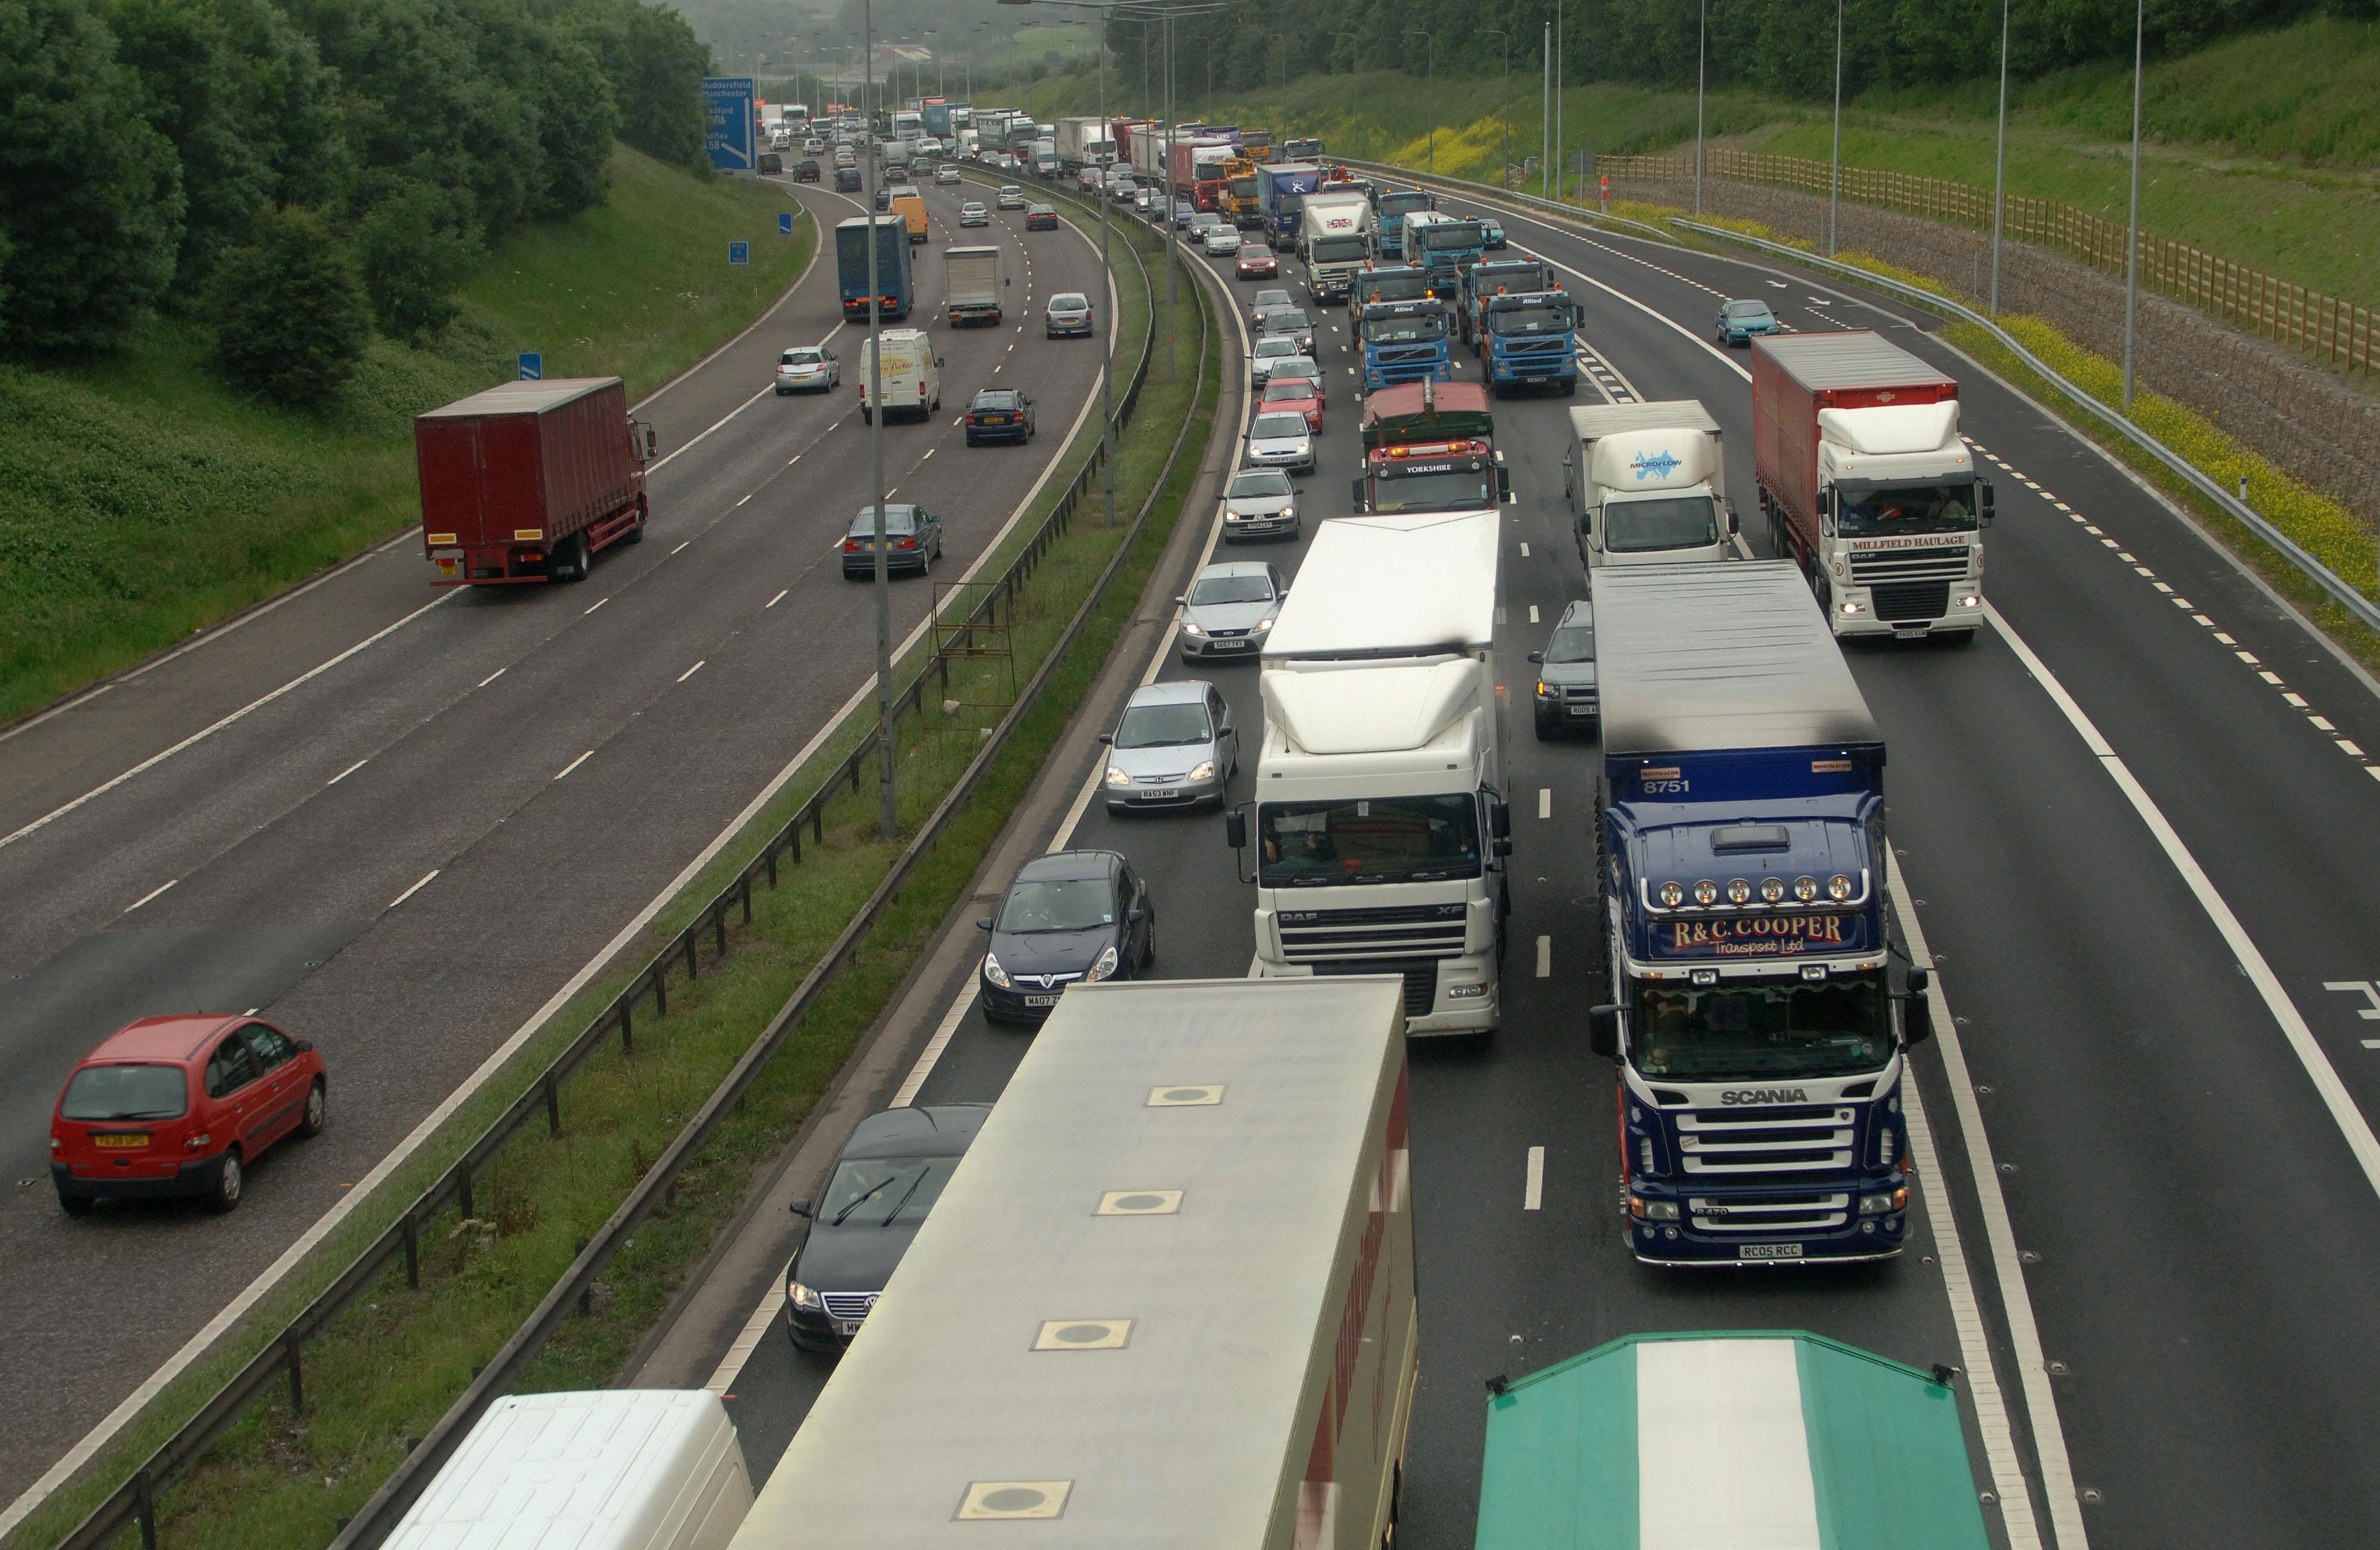 The incident took place on the M62 motorway